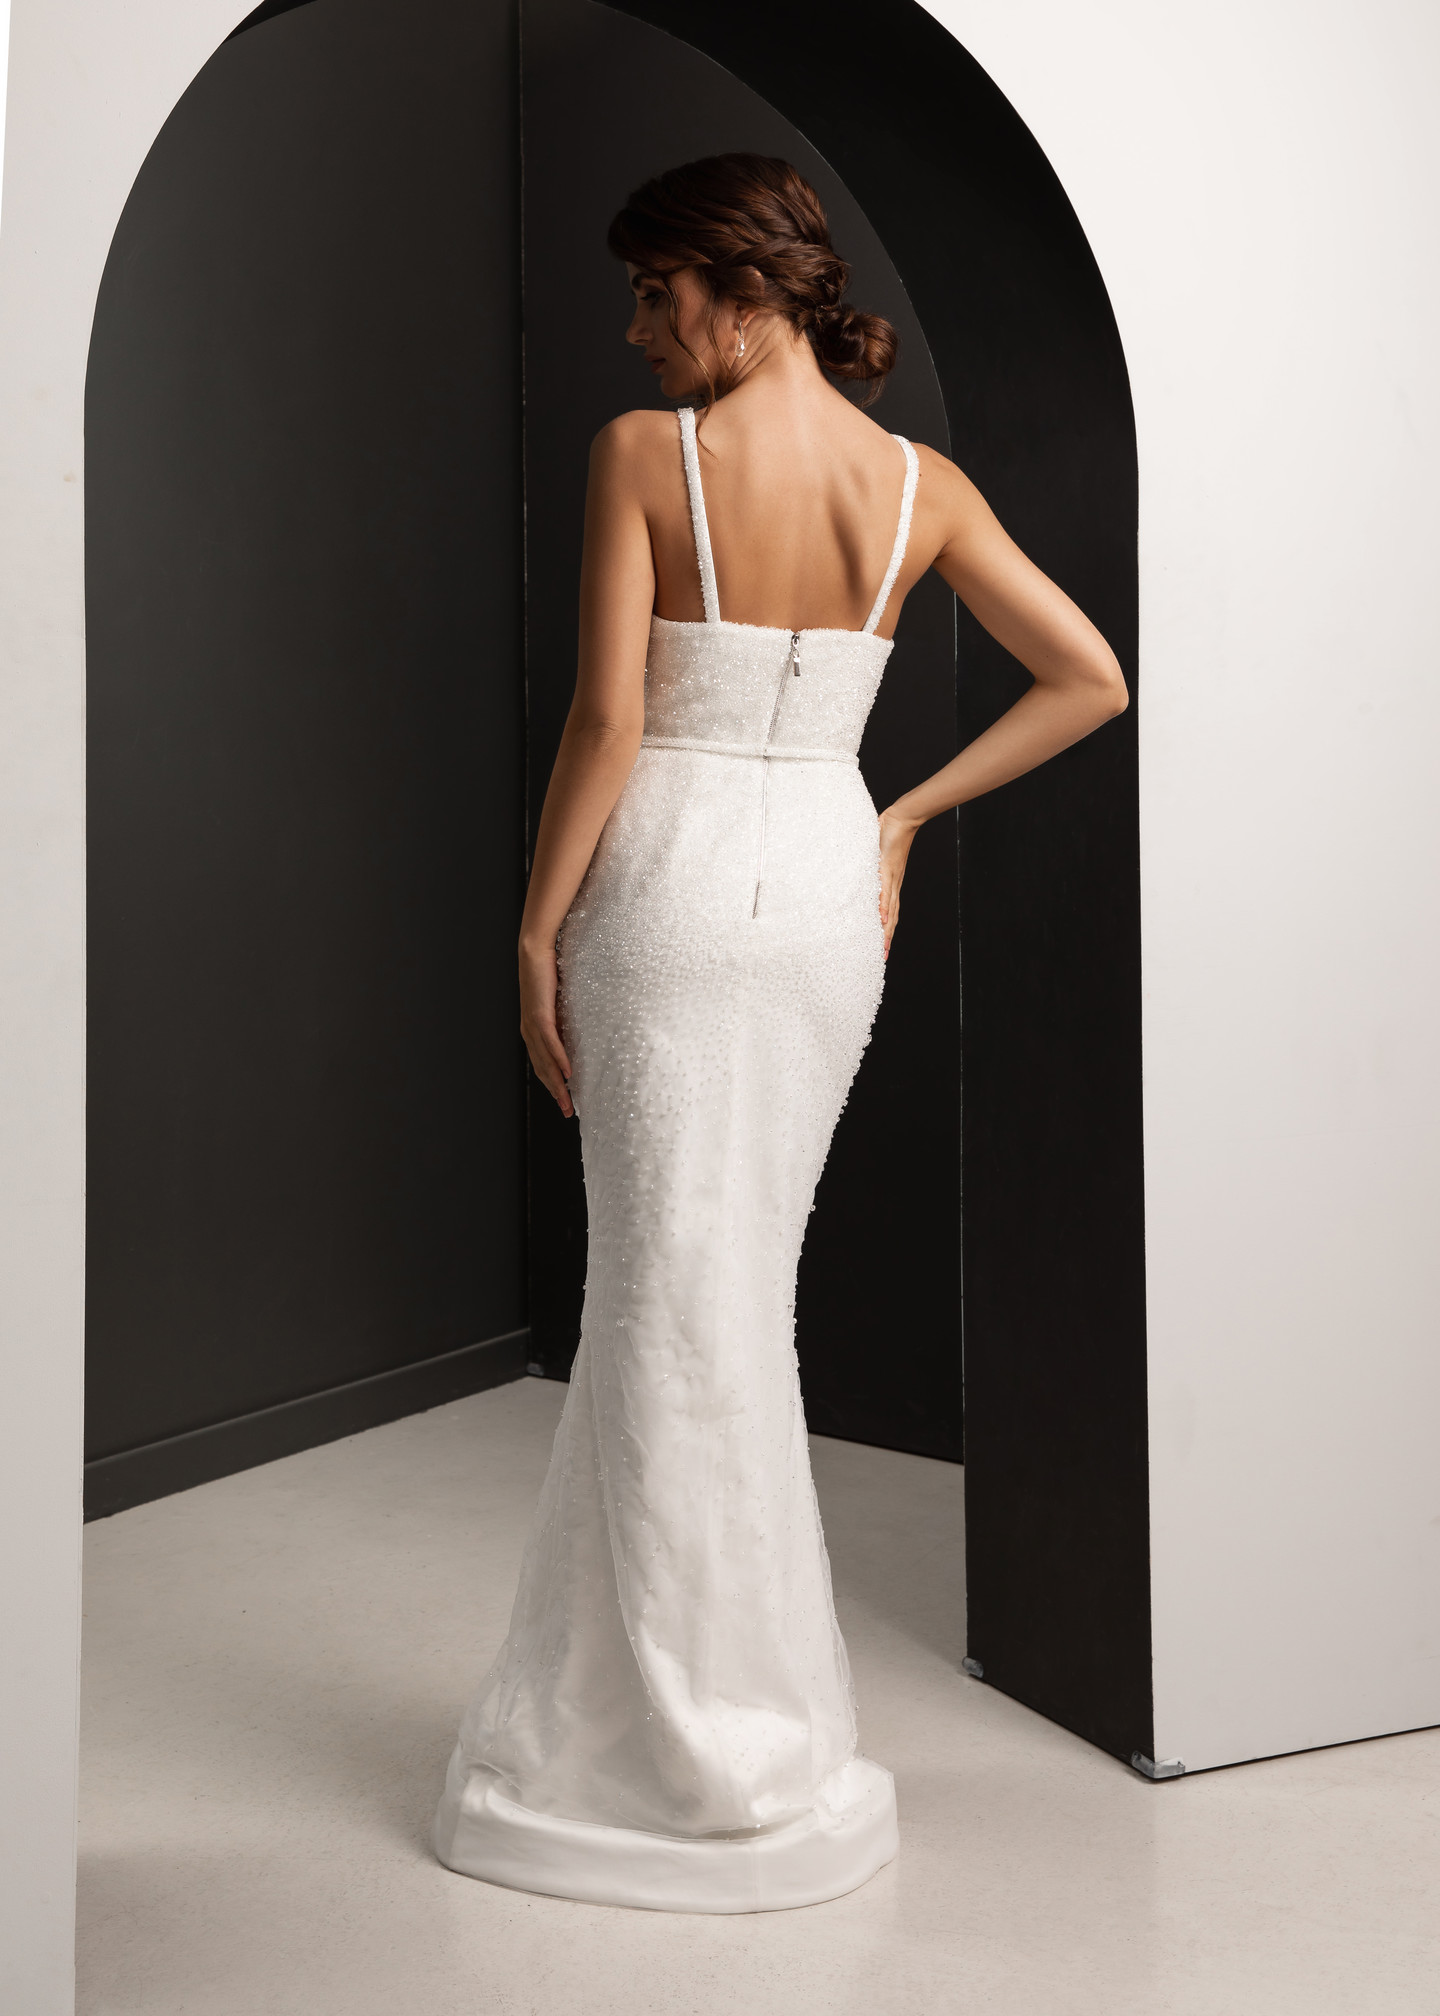 Dominica dress, 2021, couture, dress, bridal, off-white, embroidery, sheath silhouette